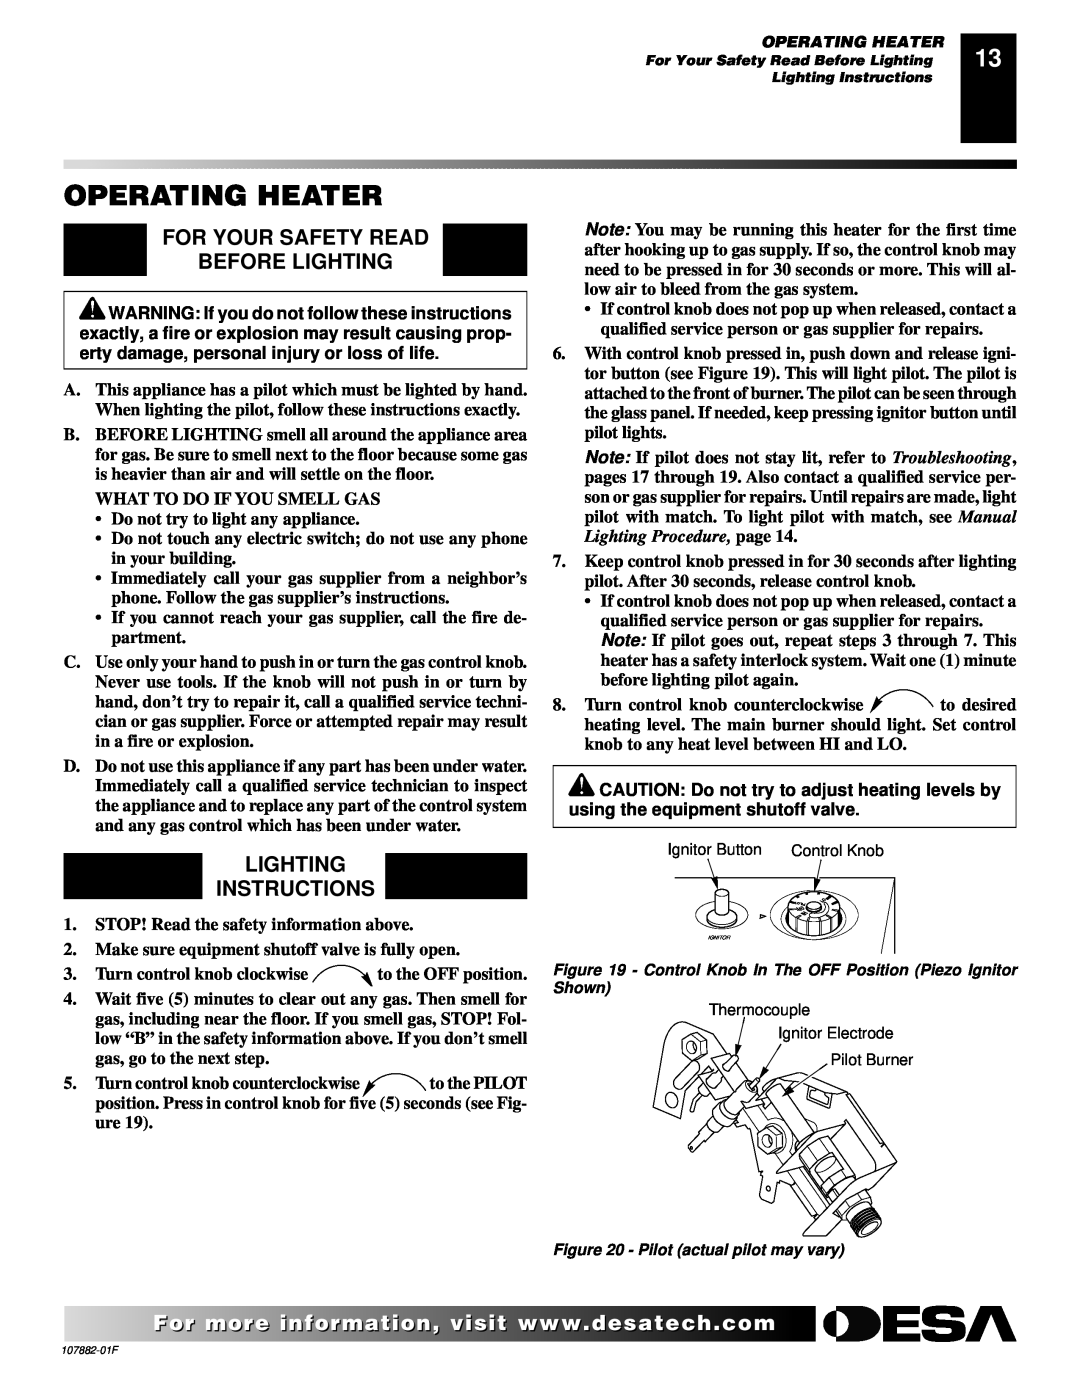 Desa CBN20 installation manual Operating Heater, For Your Safety Read Before Lighting, Lighting Instructions 